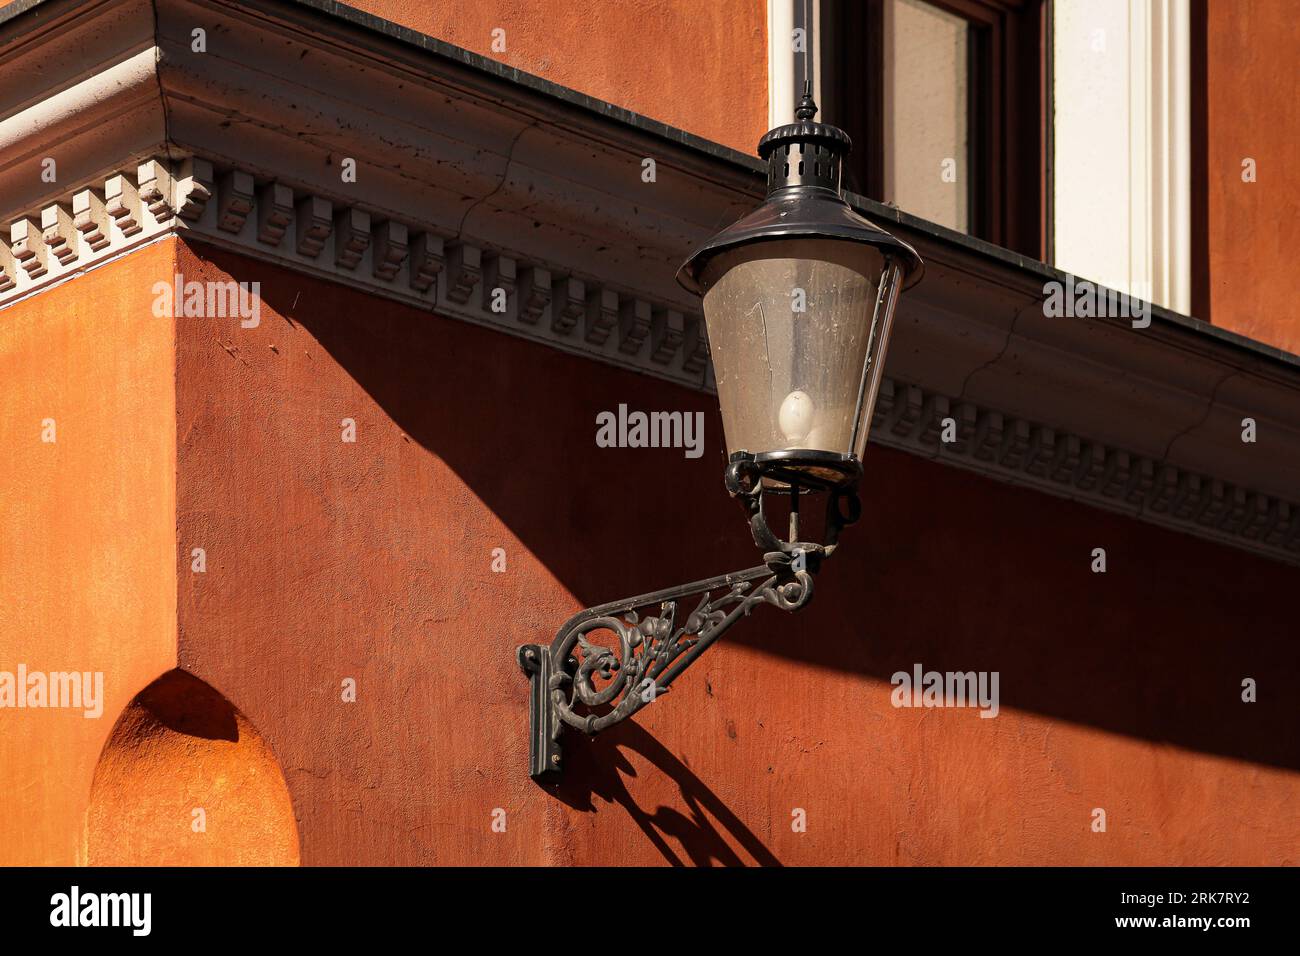 A vintage street lamp is affixed to the wall of an orange structure Stock Photo